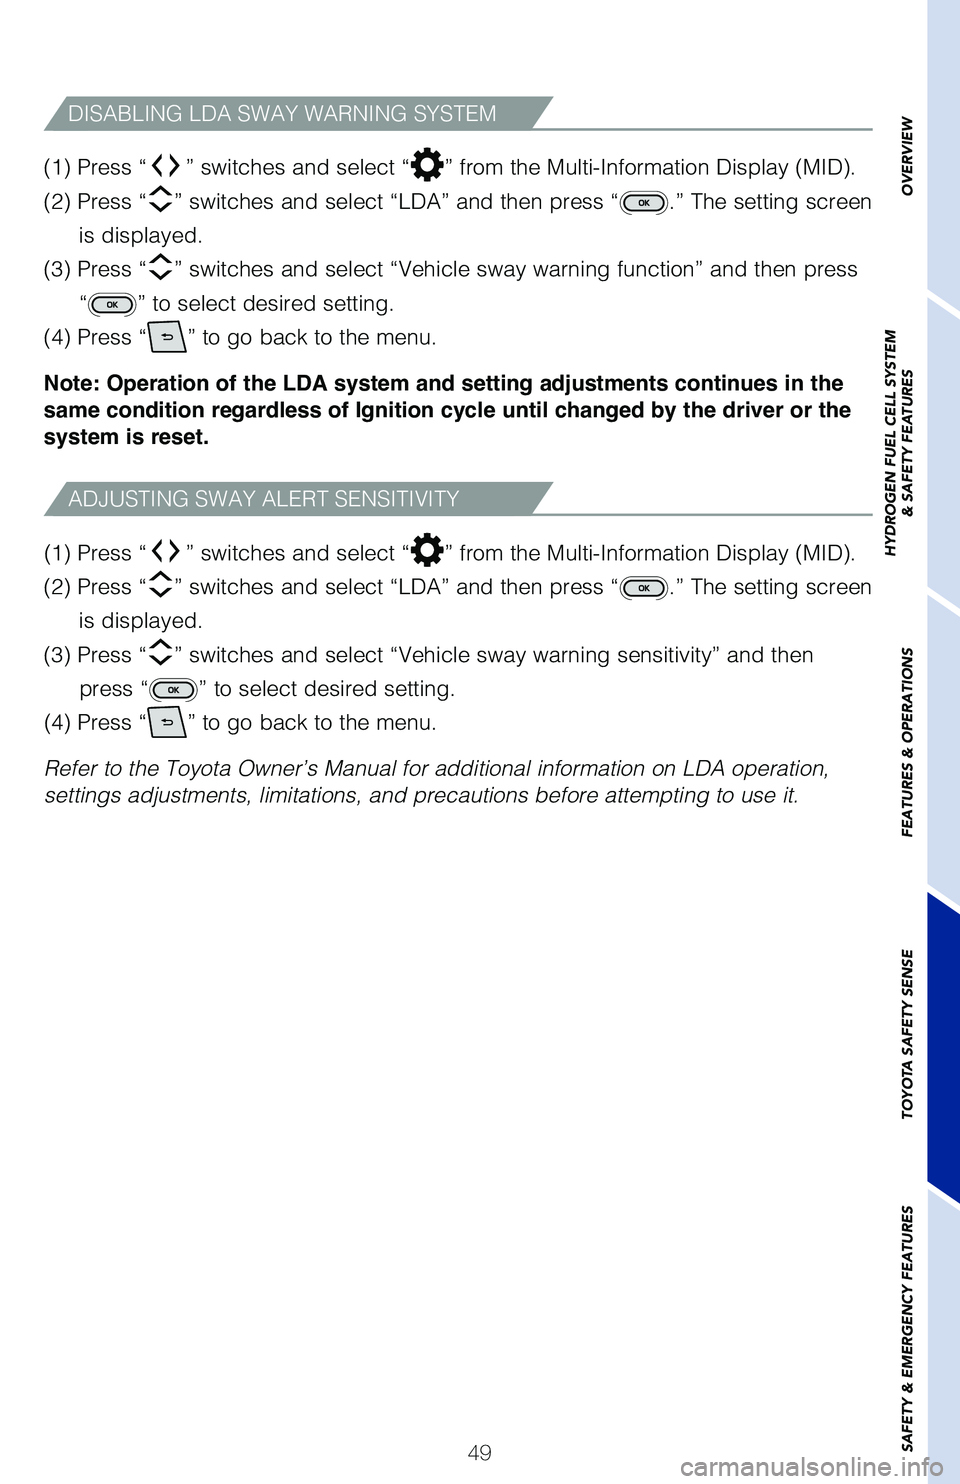 TOYOTA MIRAI 2021  Owners Manual (in English) 49
(1) Press “
” switches and select “” from the Multi-Information Display (MID).  
(2) Press “
” switches and select “LDA” and then press “.” The setting screen 
is displayed.
(3)